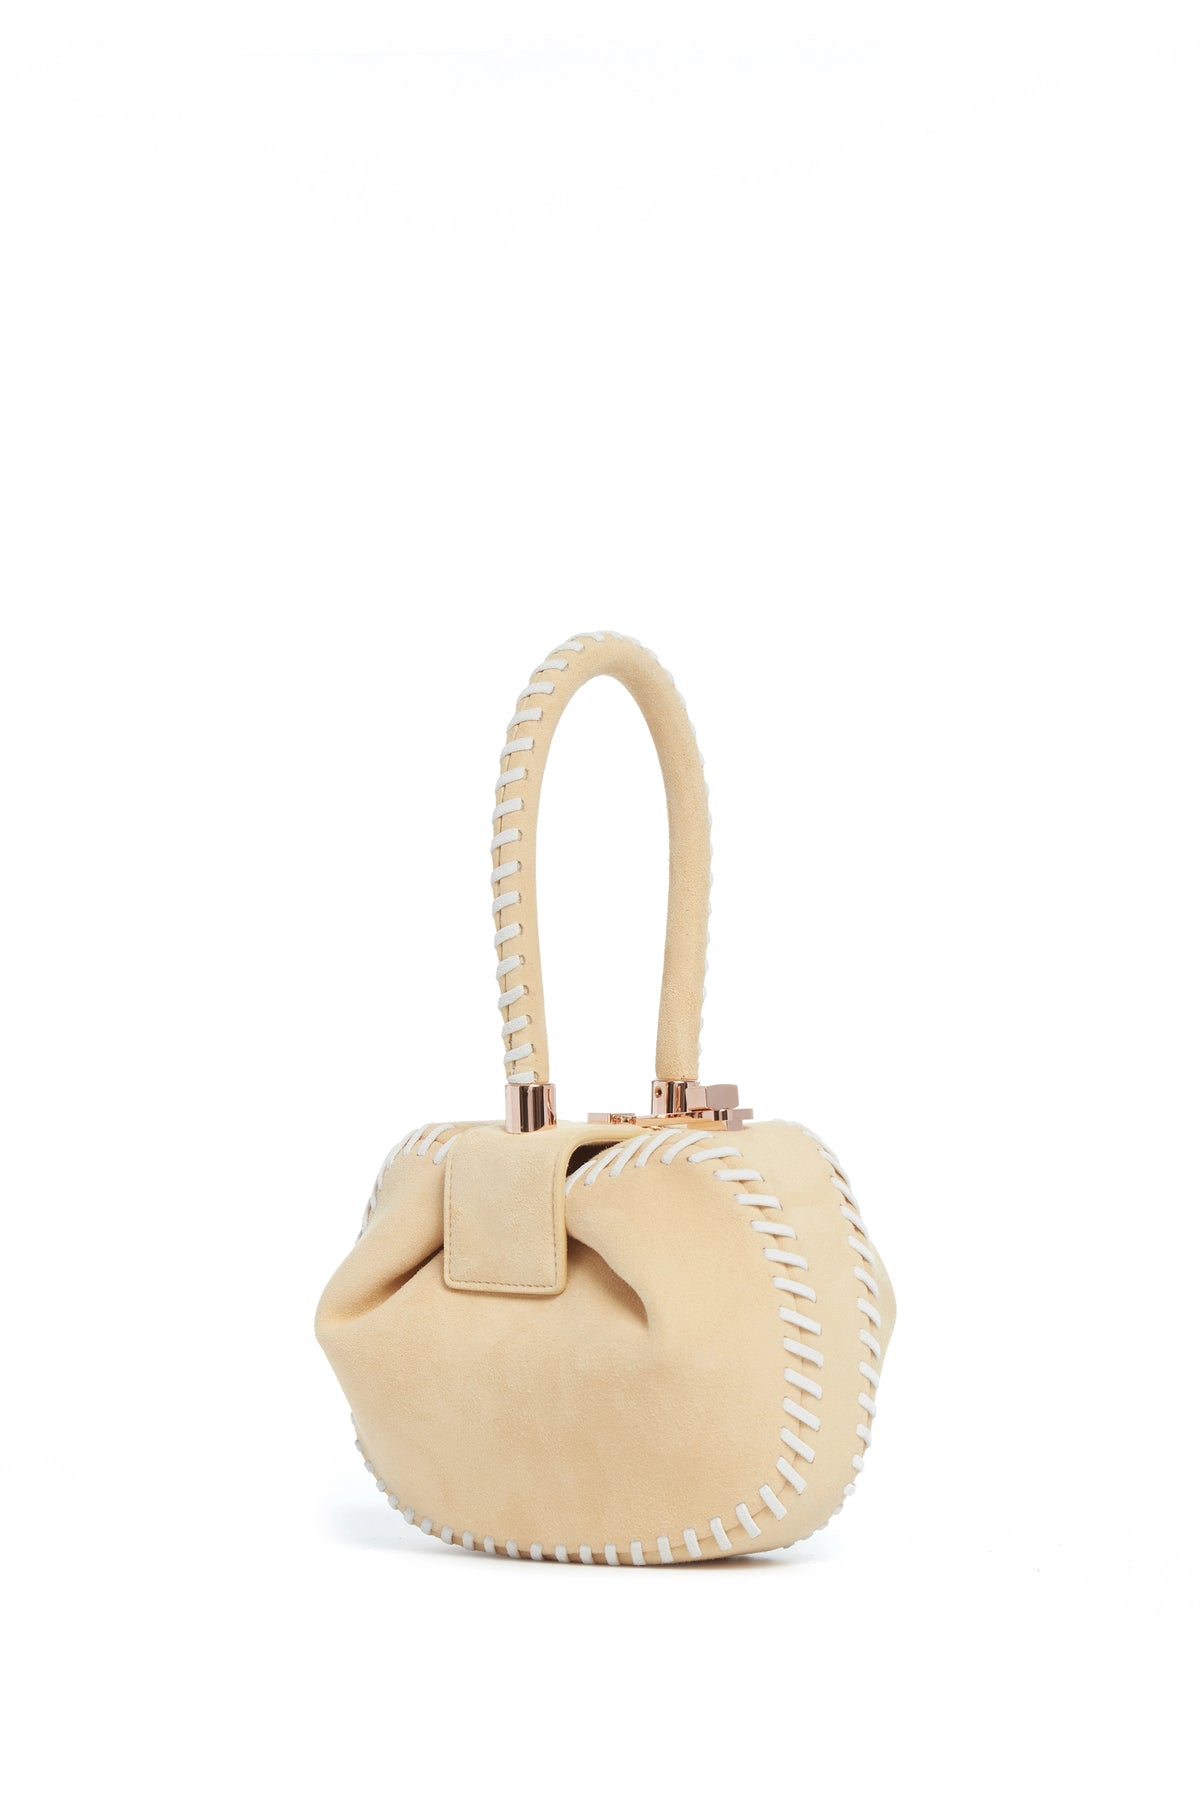 Whipstitch Demi Bag in Nude Suede